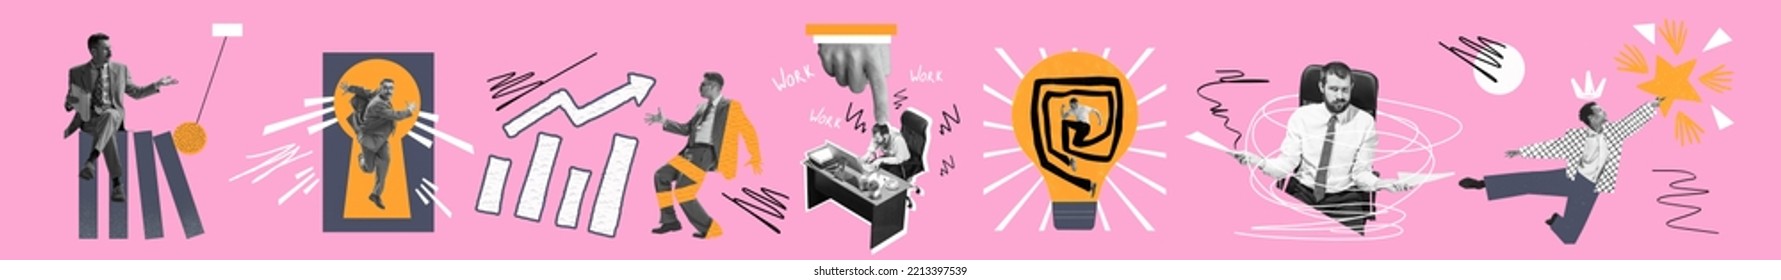 Flyer, banner. Contemporary art collage made of shots of young men, managers and office clerks working hardly isolated over pink background. Concept of art, finance, career, co-workers, team. Flyer - Shutterstock ID 2213397539